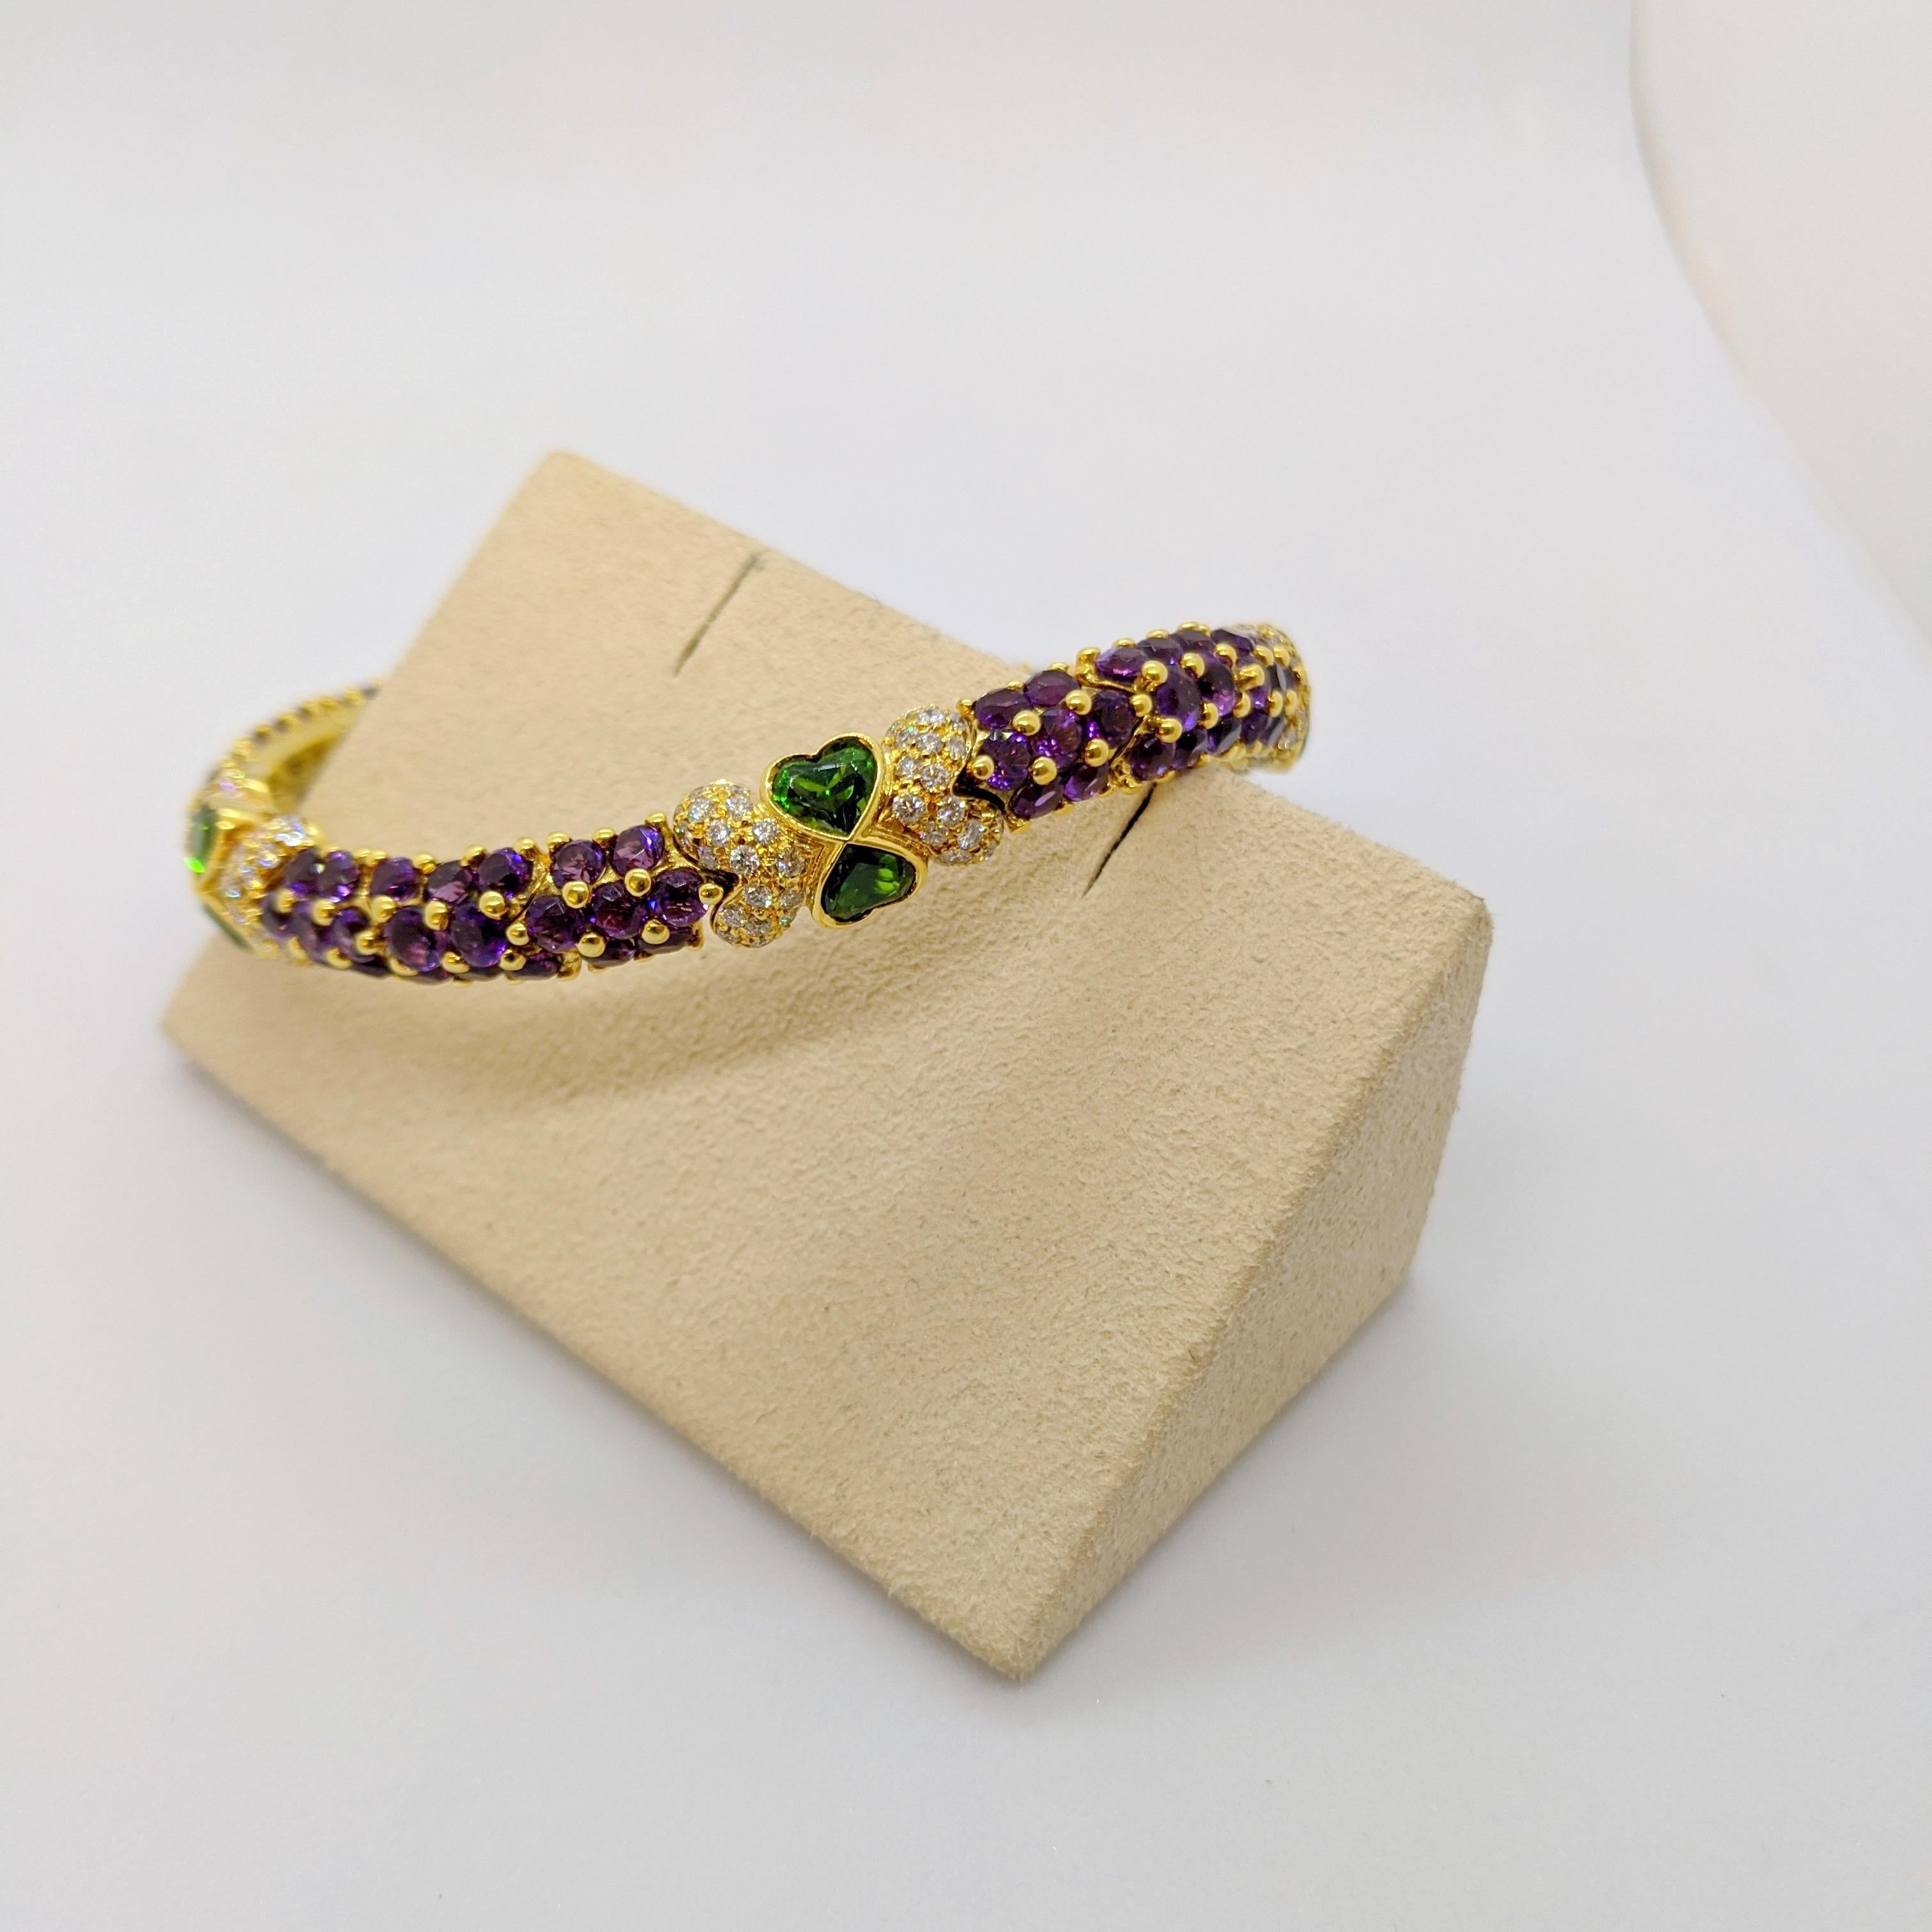 This bracelet was designed by G. Verdi of Italy. The round brilliant cut Amethyst stones are set in 18 karat yellow gold prongs that give a beautiful beaded effect. Round brilliant Diamonds and heart shaped Tsavorites join the Amethyst links. When